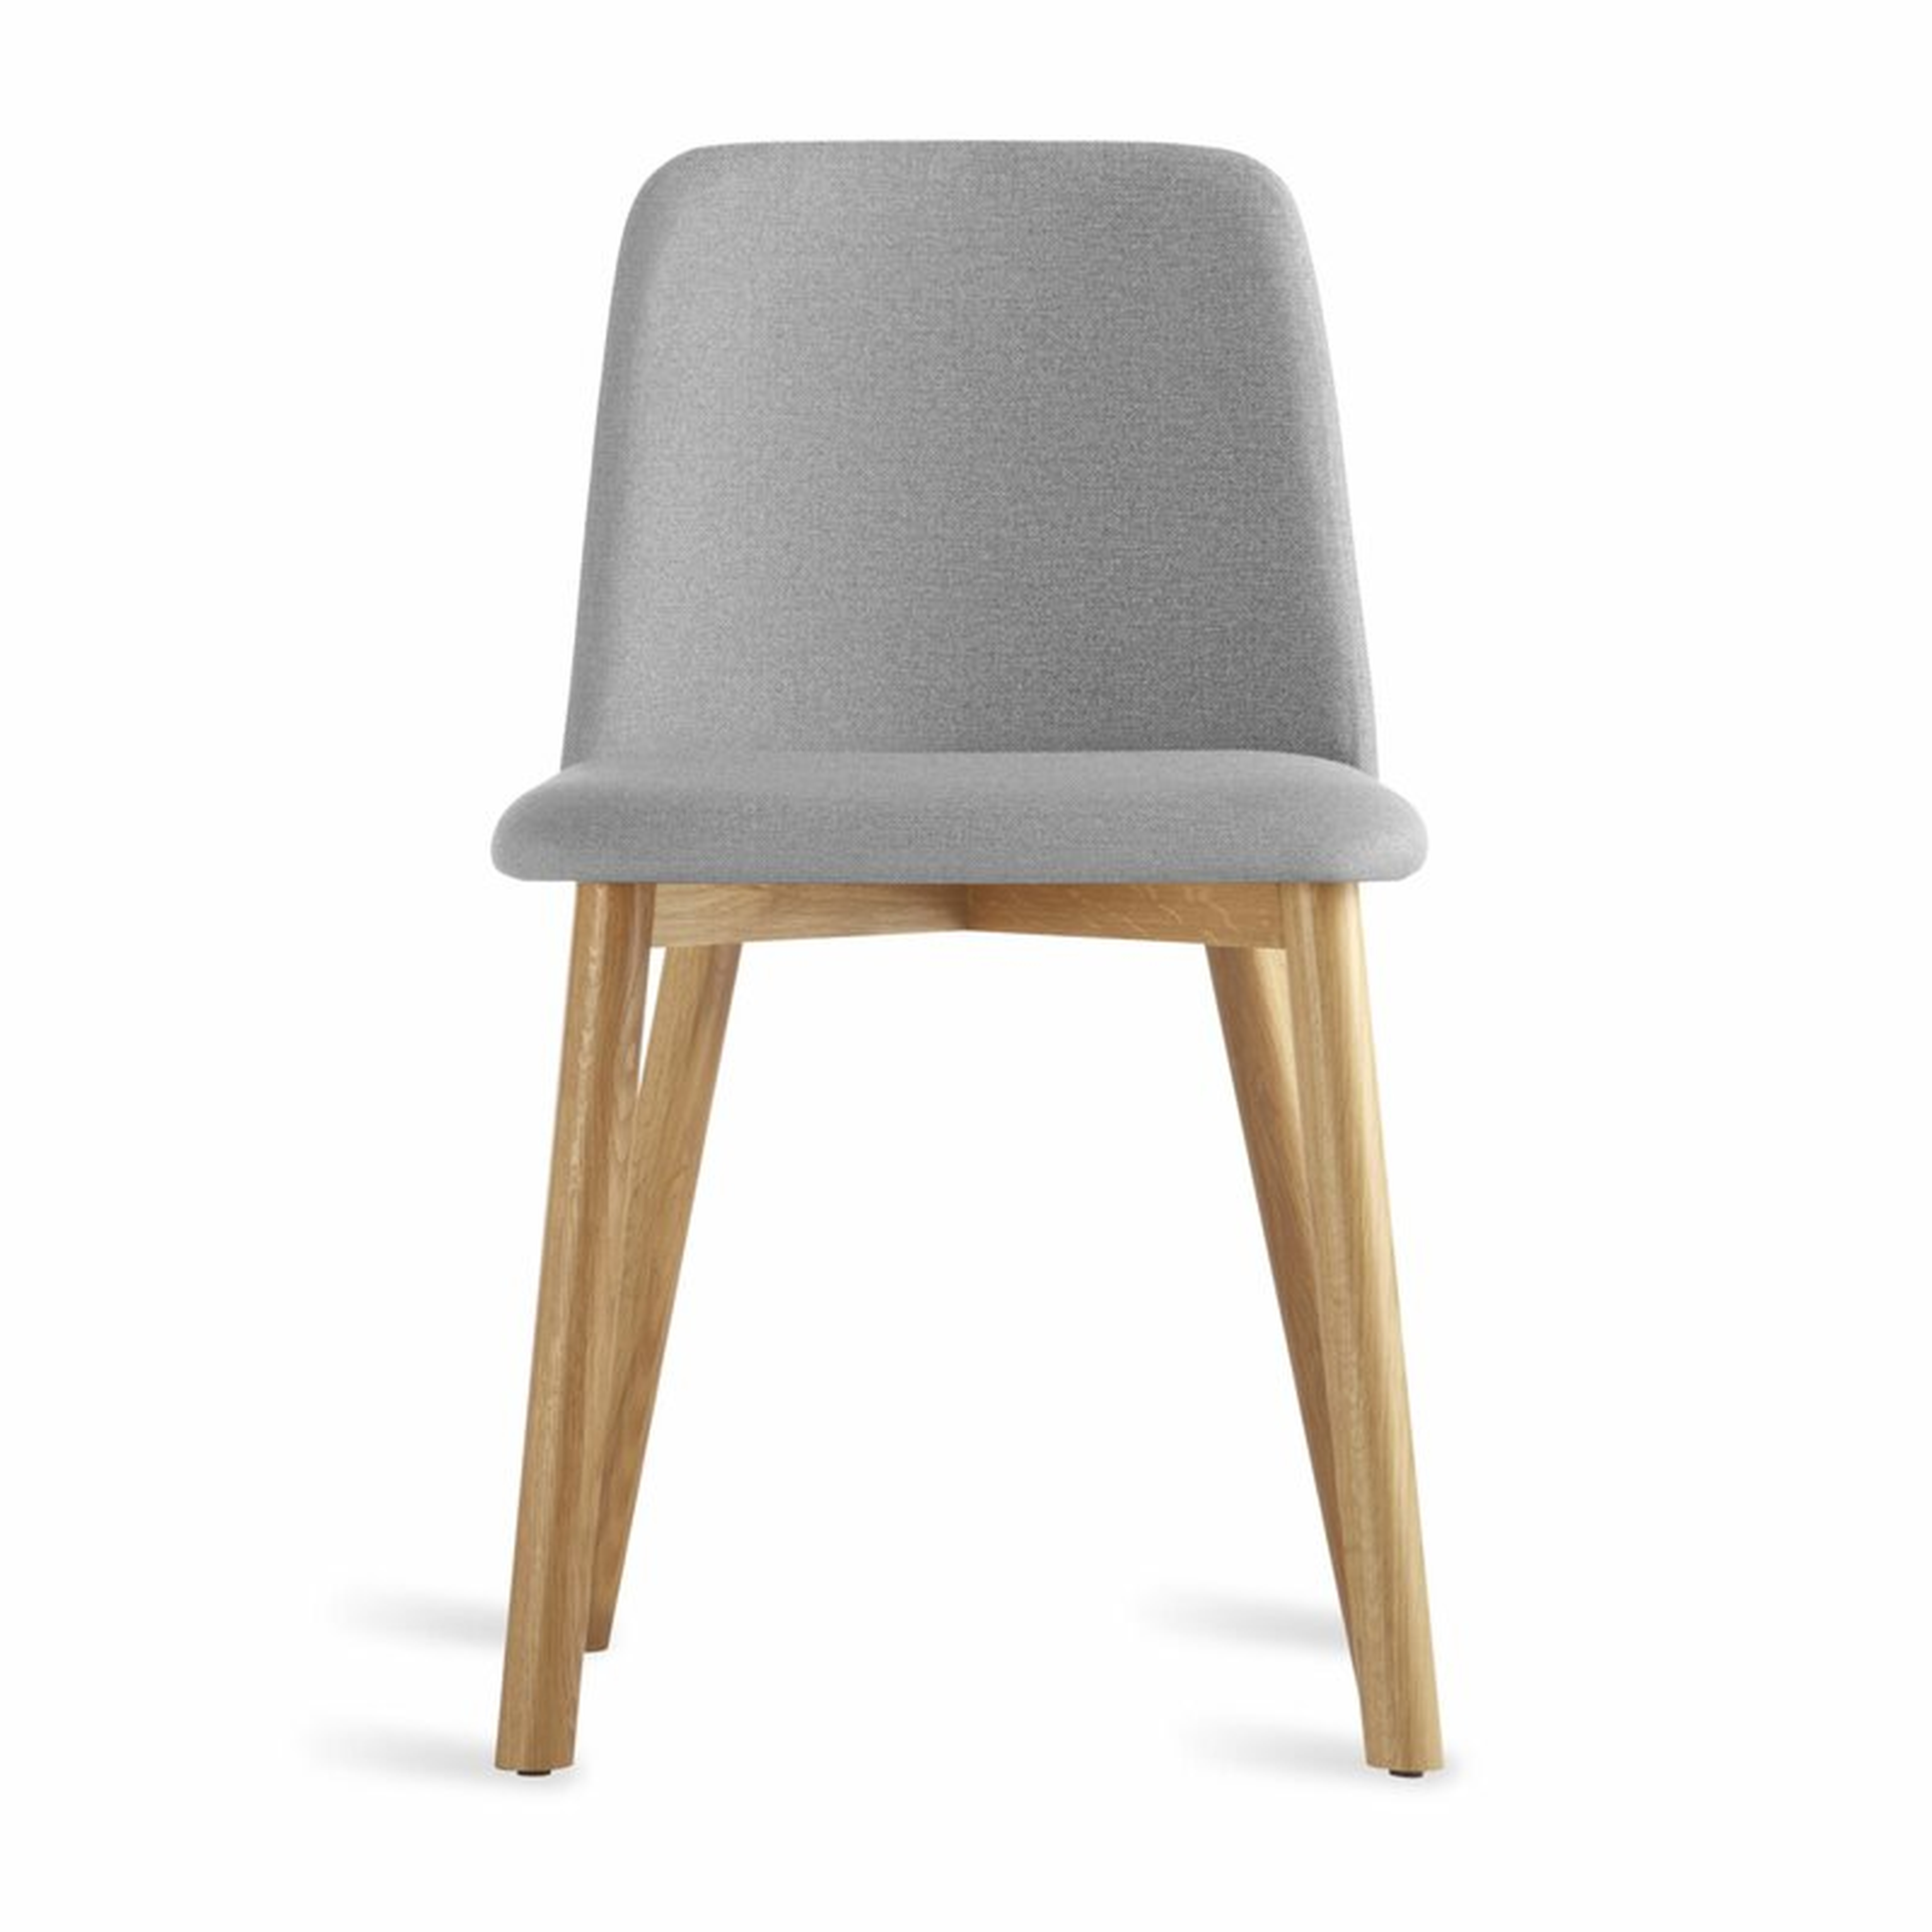 Blu Dot Chip Side Chair in Pewter Color: White Oak - Perigold